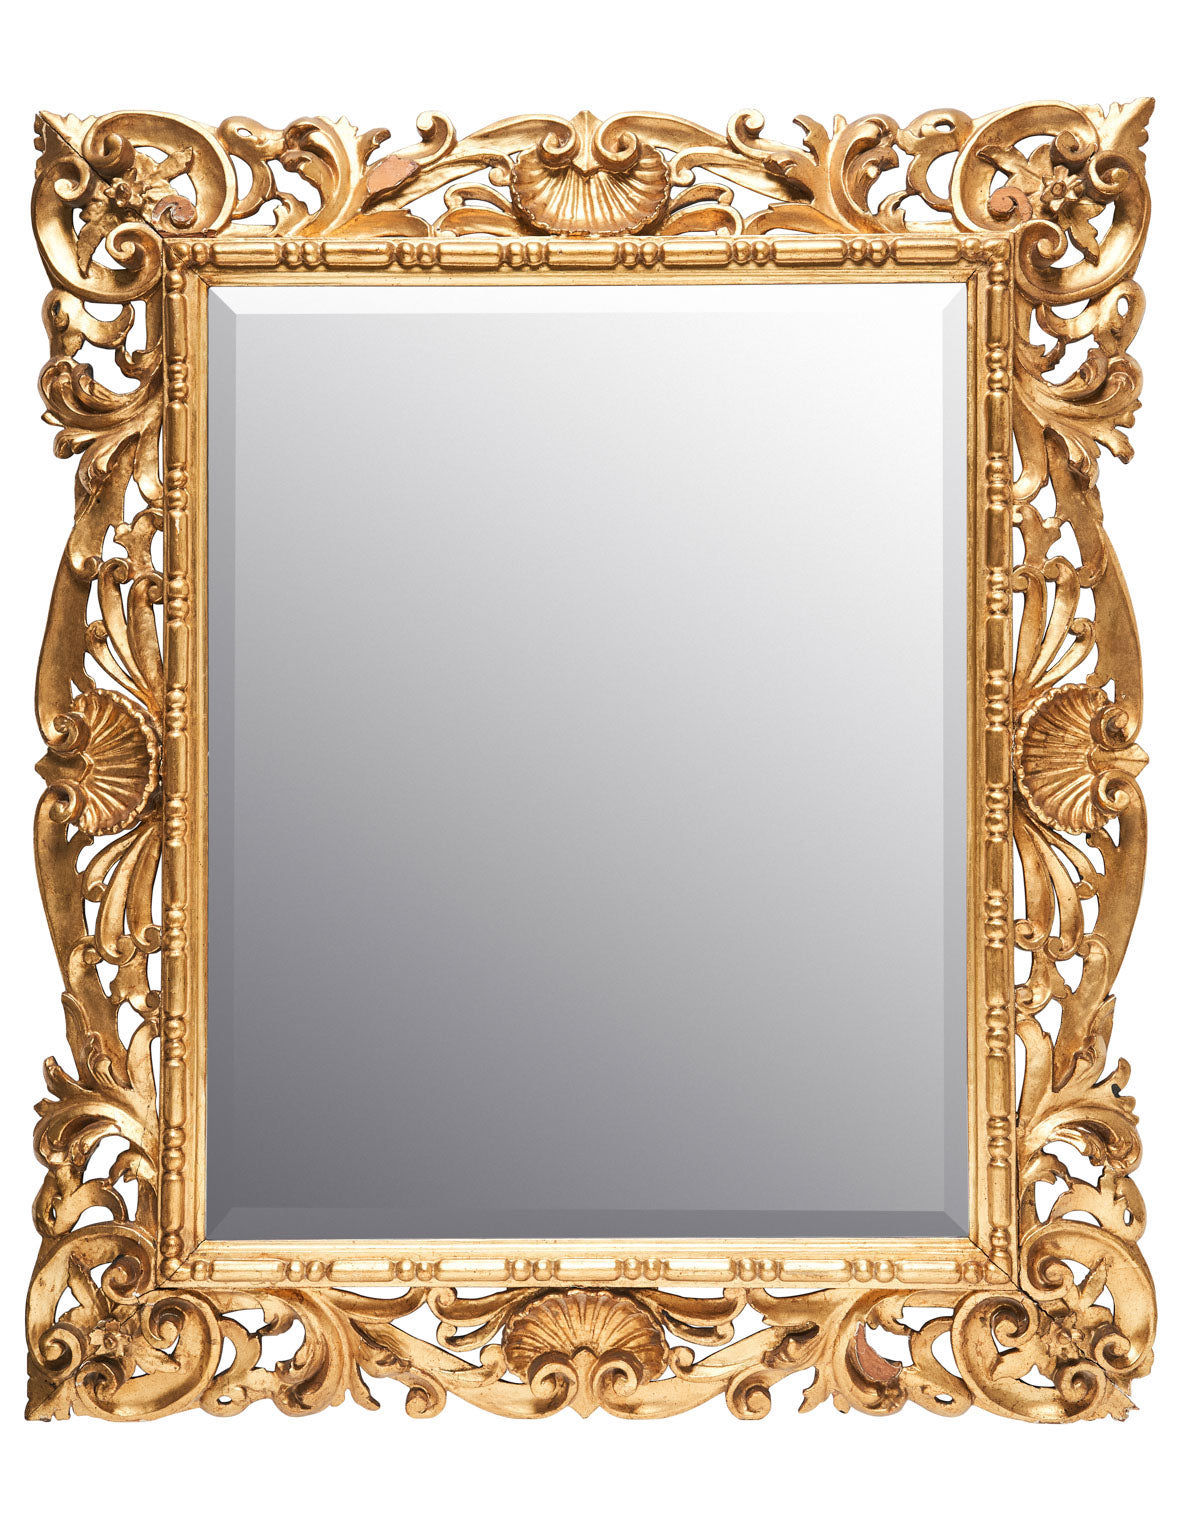 SOLD A very good quality carved gilt-wood mirror, Italian 19th Century